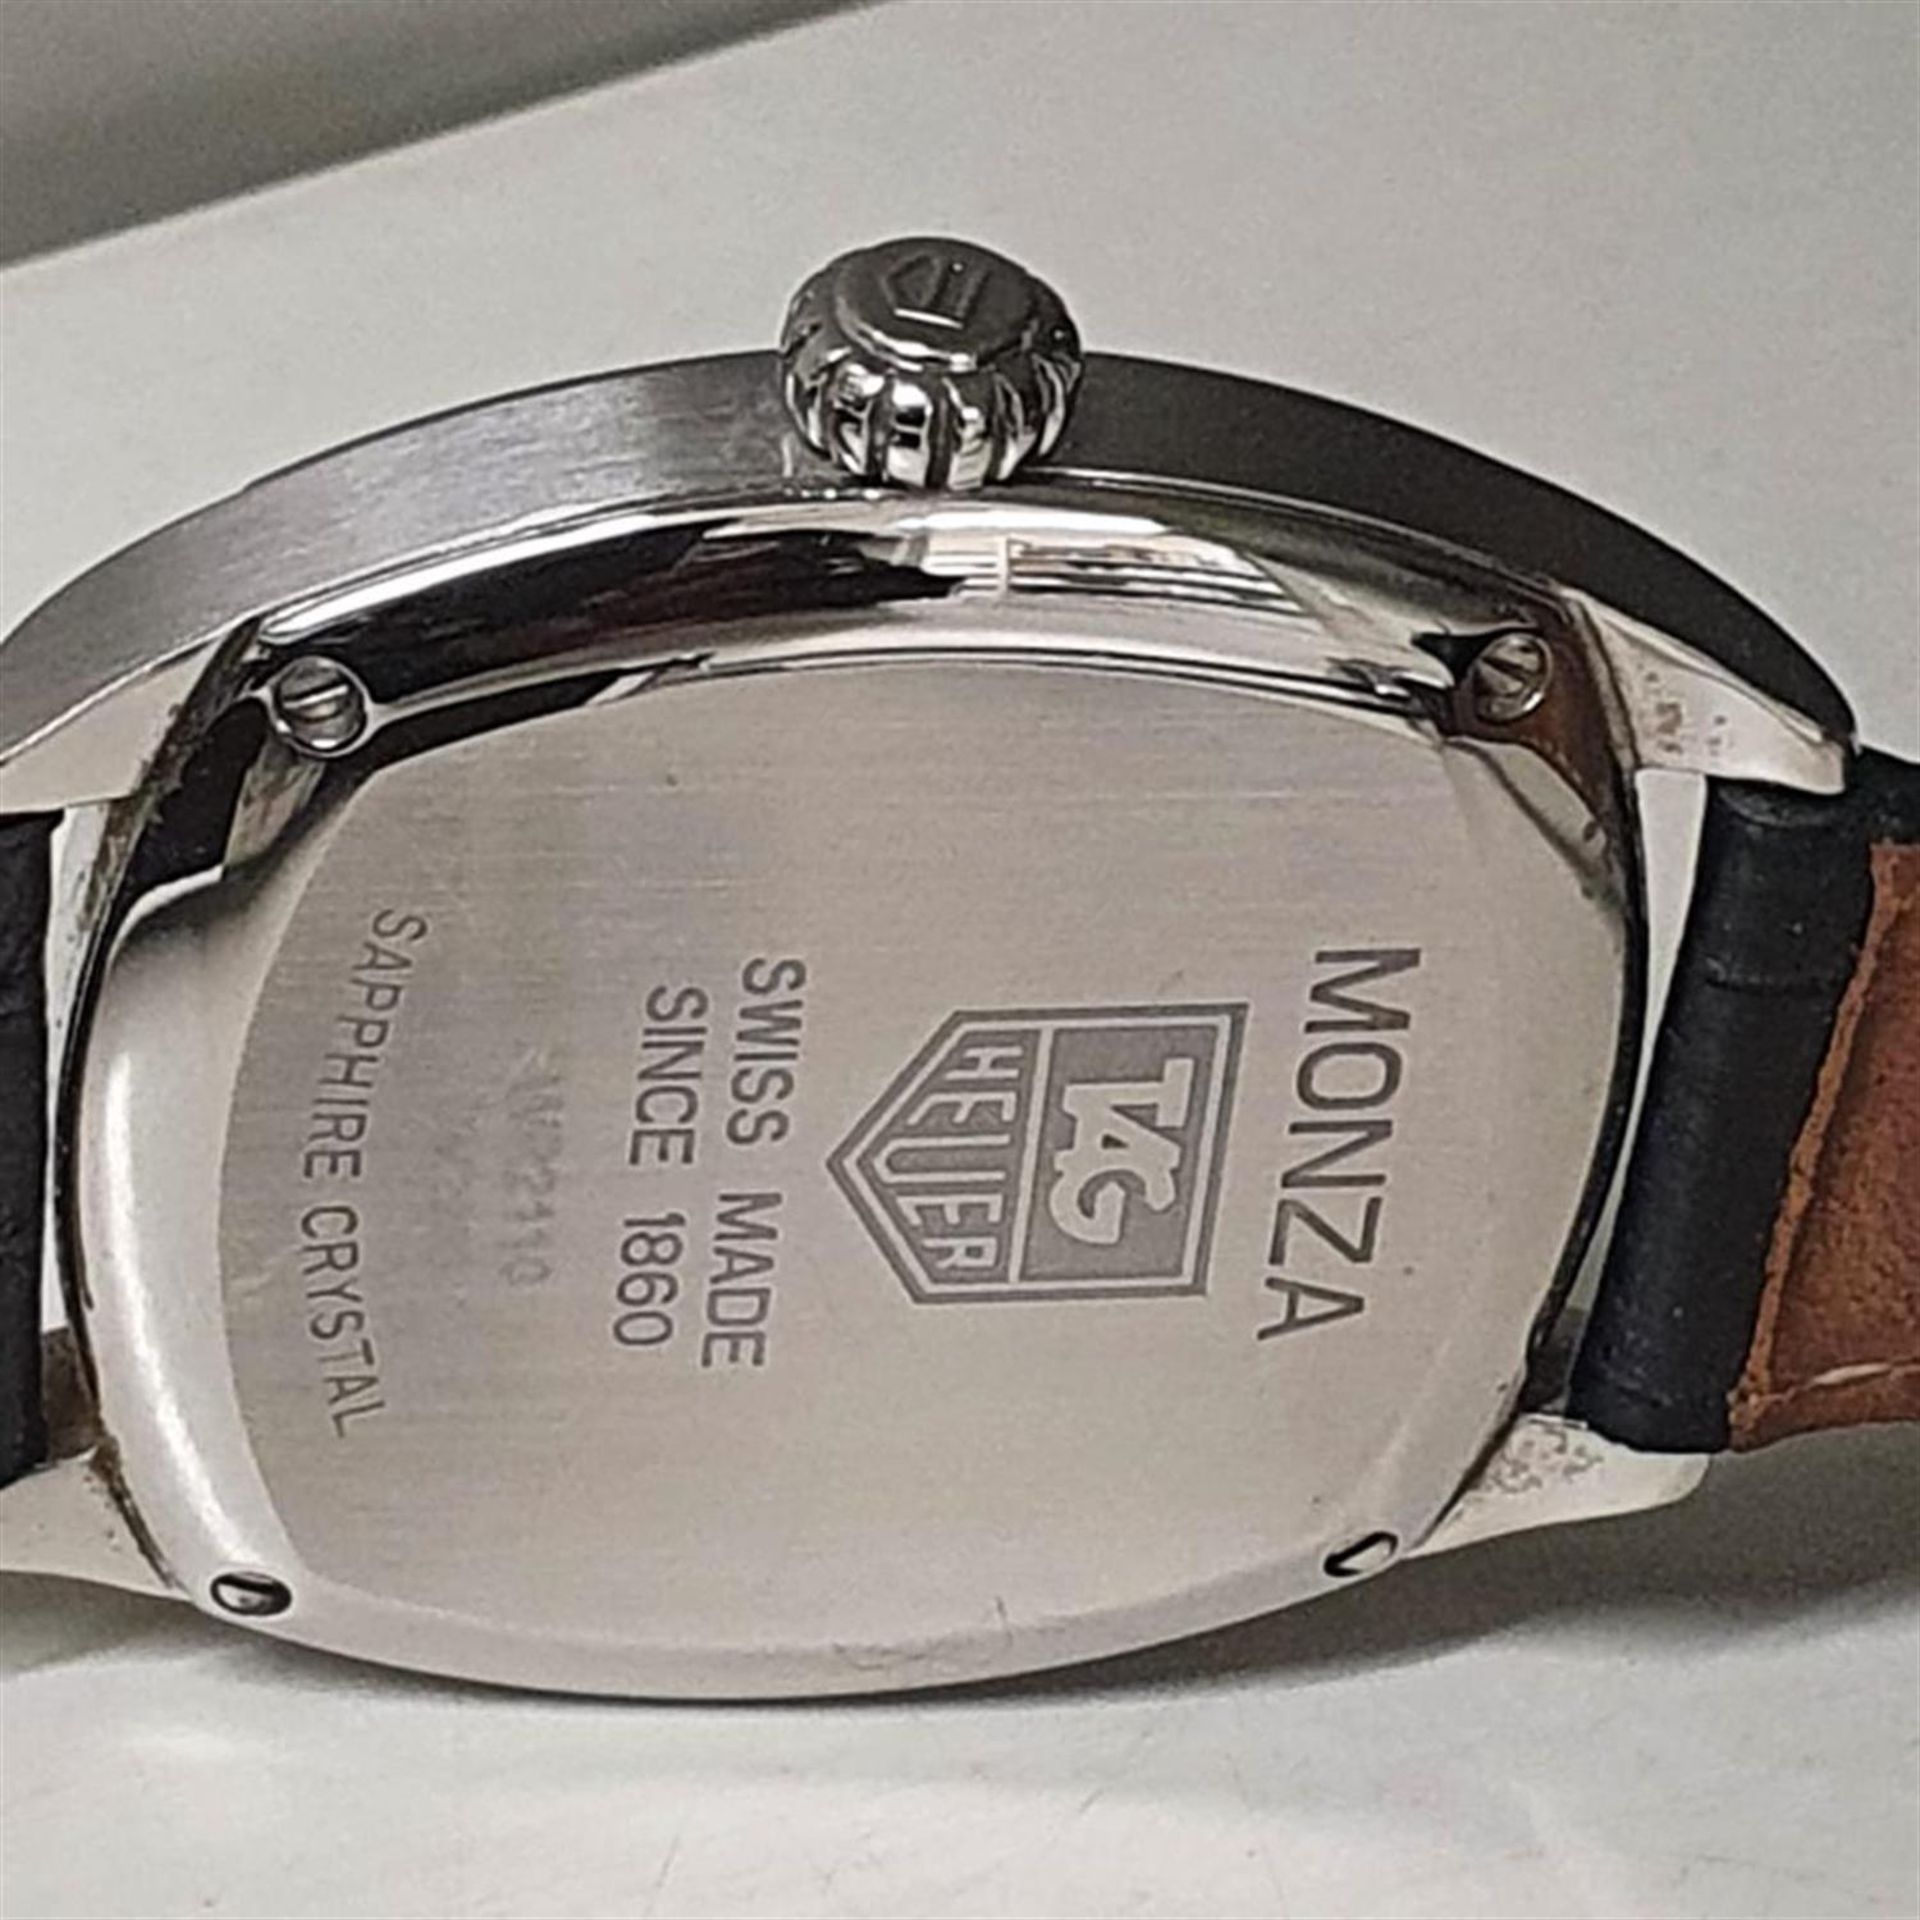 TAG Heuer Monza WR2110 Automatic Watch - Image 6 of 7